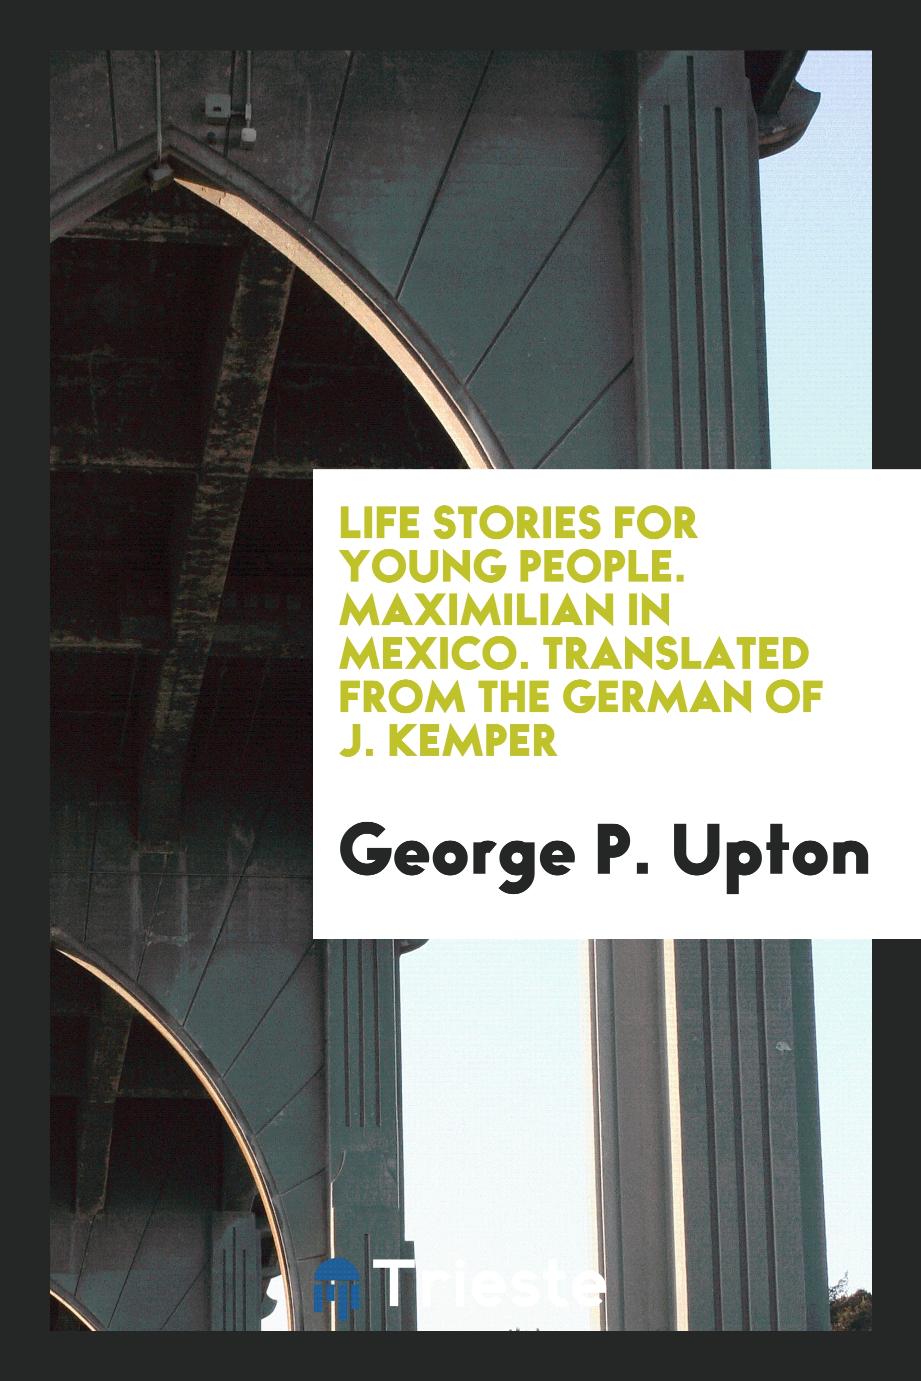 Life Stories for Young People. Maximilian in Mexico. Translated from the German of J. Kemper